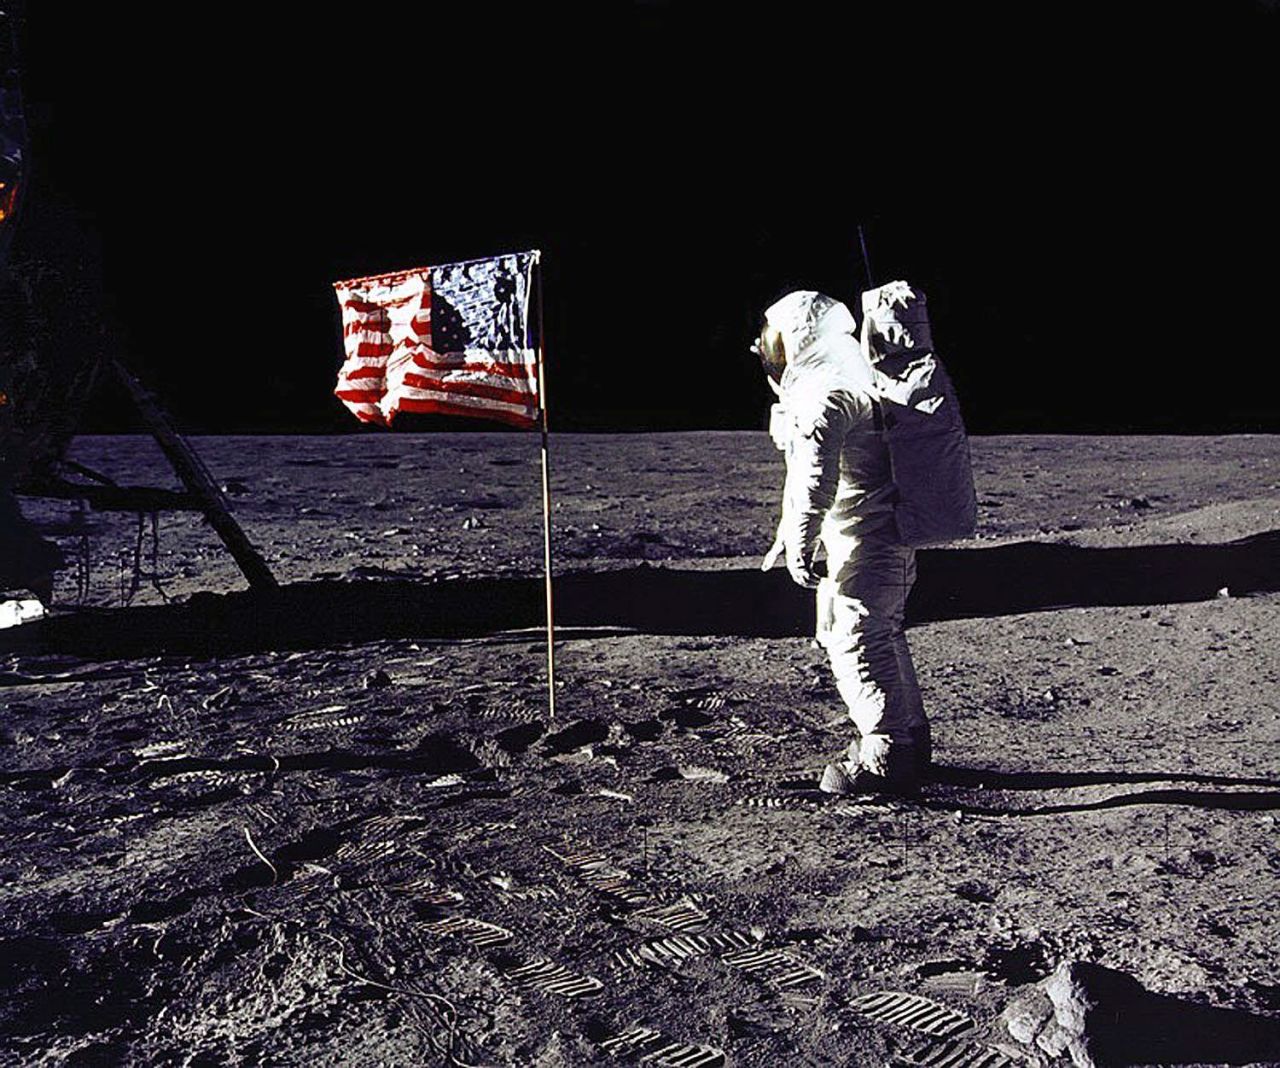 Apollo 11 astronaut Edwin E. "Buzz" Aldrin Jr. salutes the U.S. flag on the lunar surface on July 20, 1969. Aldrin and mission commander Neil Armstrong became the first humans to walk on the moon. Their mission was considered an American victory in the Cold War and subsequent space race, meeting President Kennedy's goal of "landing a man on the moon and returning him safely" before the end of the decade.